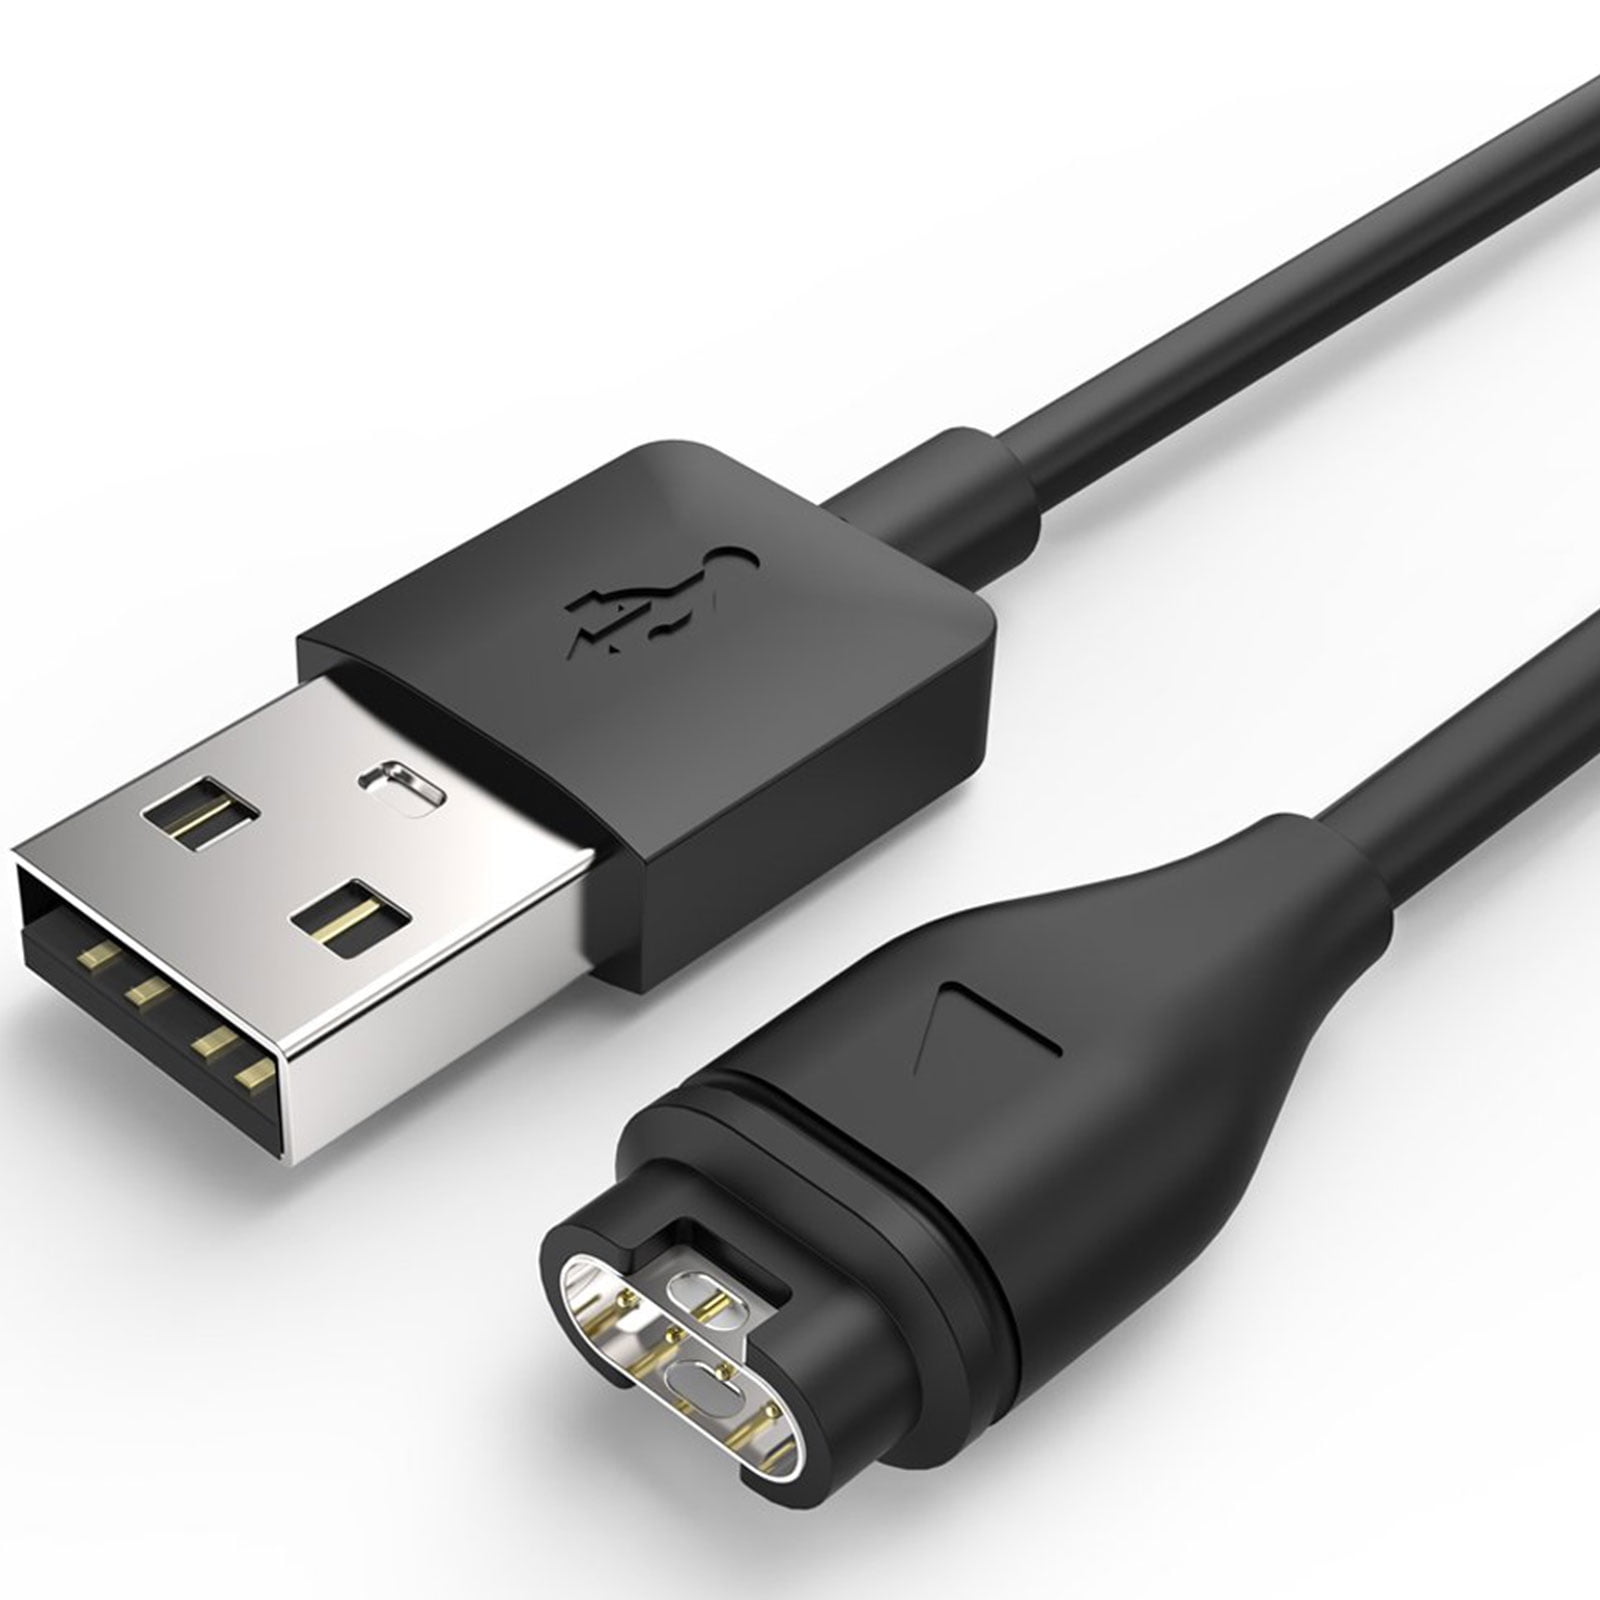 USB Charger Charging Cable Cord for 